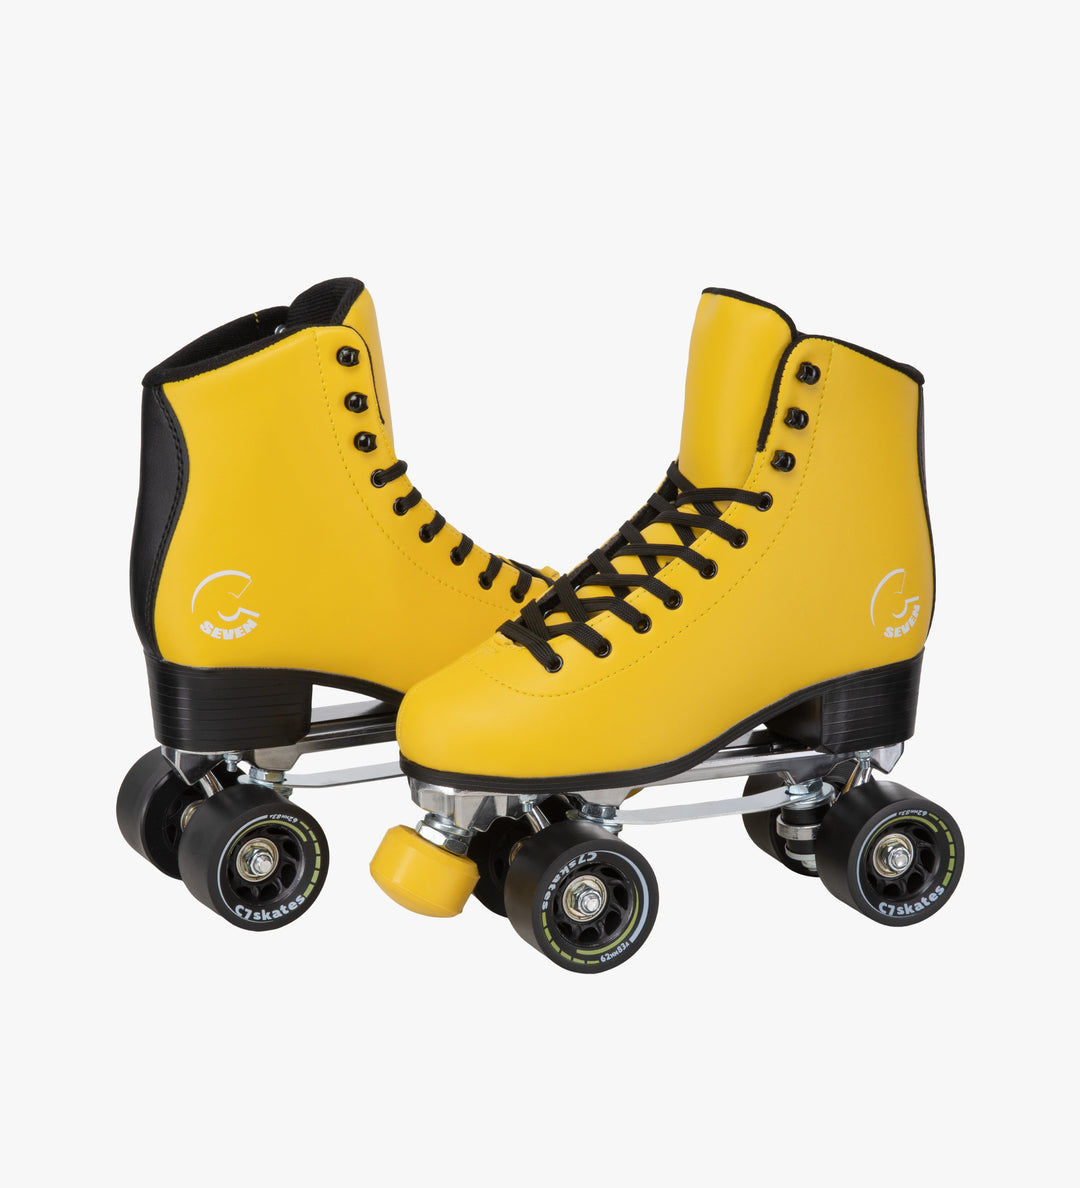 The C7skates Queen Bee Quad Skates feature a black and yellow color, removable toe stops, 62mm wheels and a structured boot. 